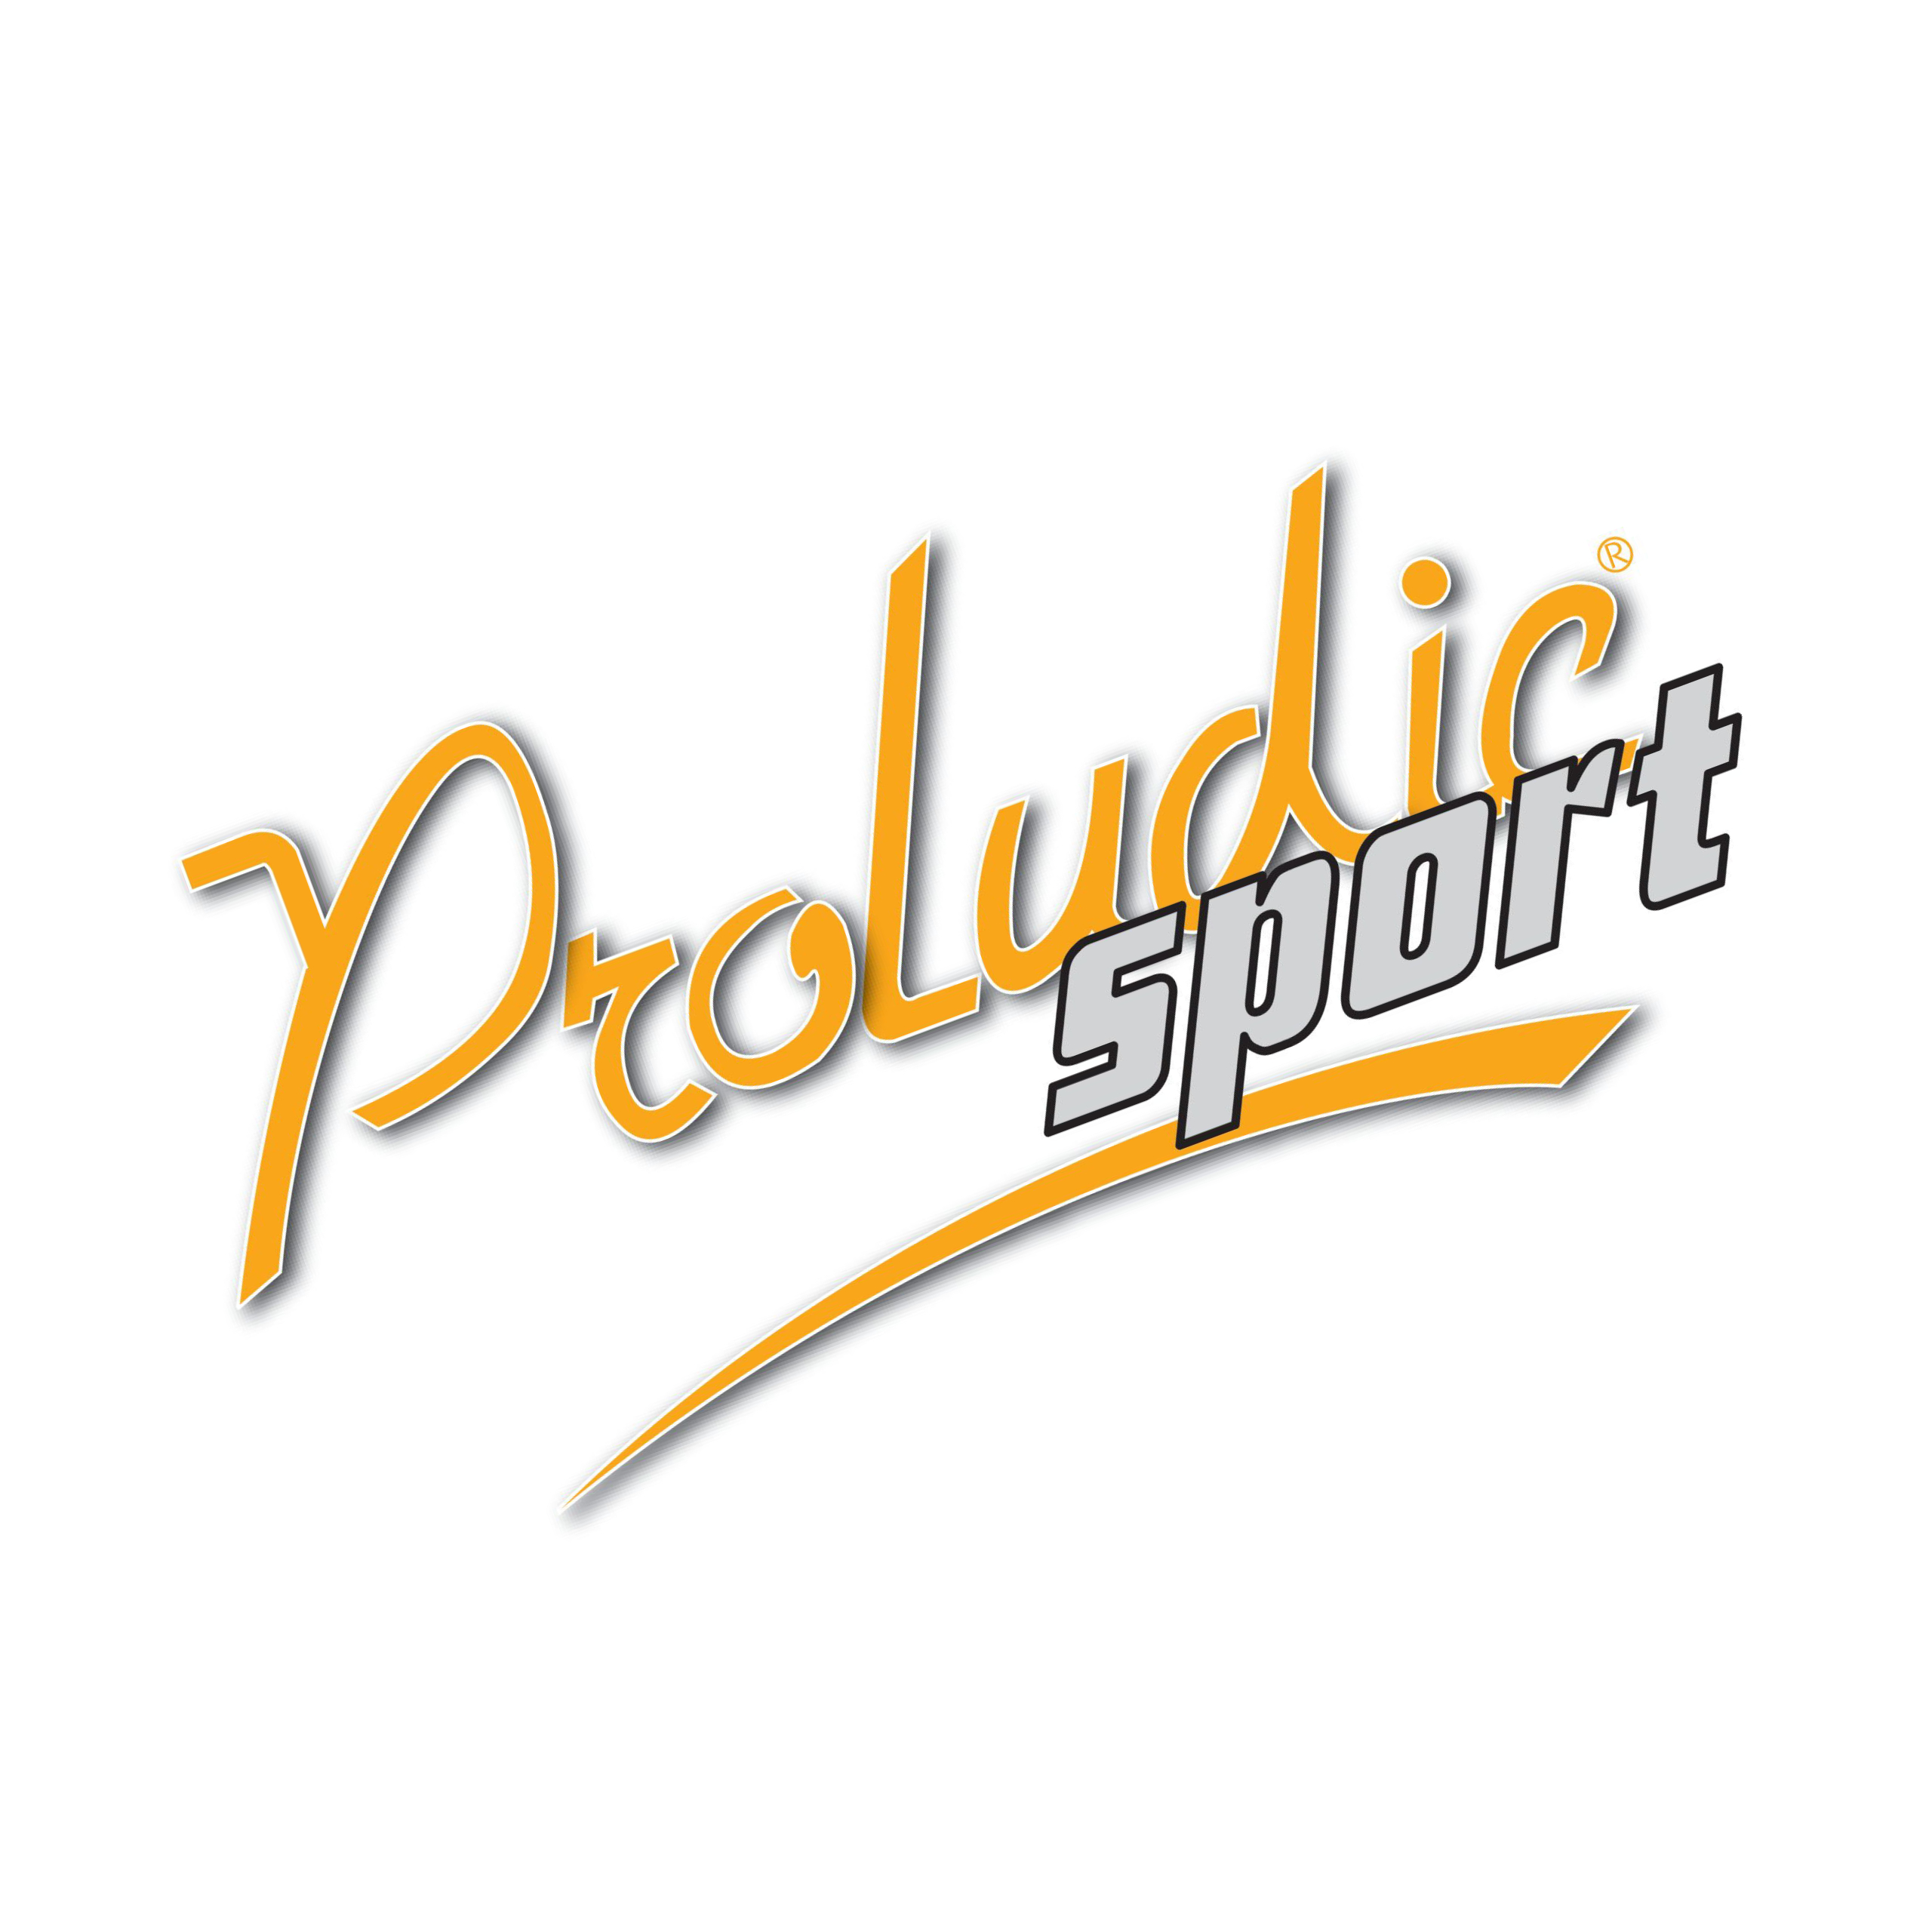 Read more about the article Proludic Sport App Raises The Bar on Privacy and Security